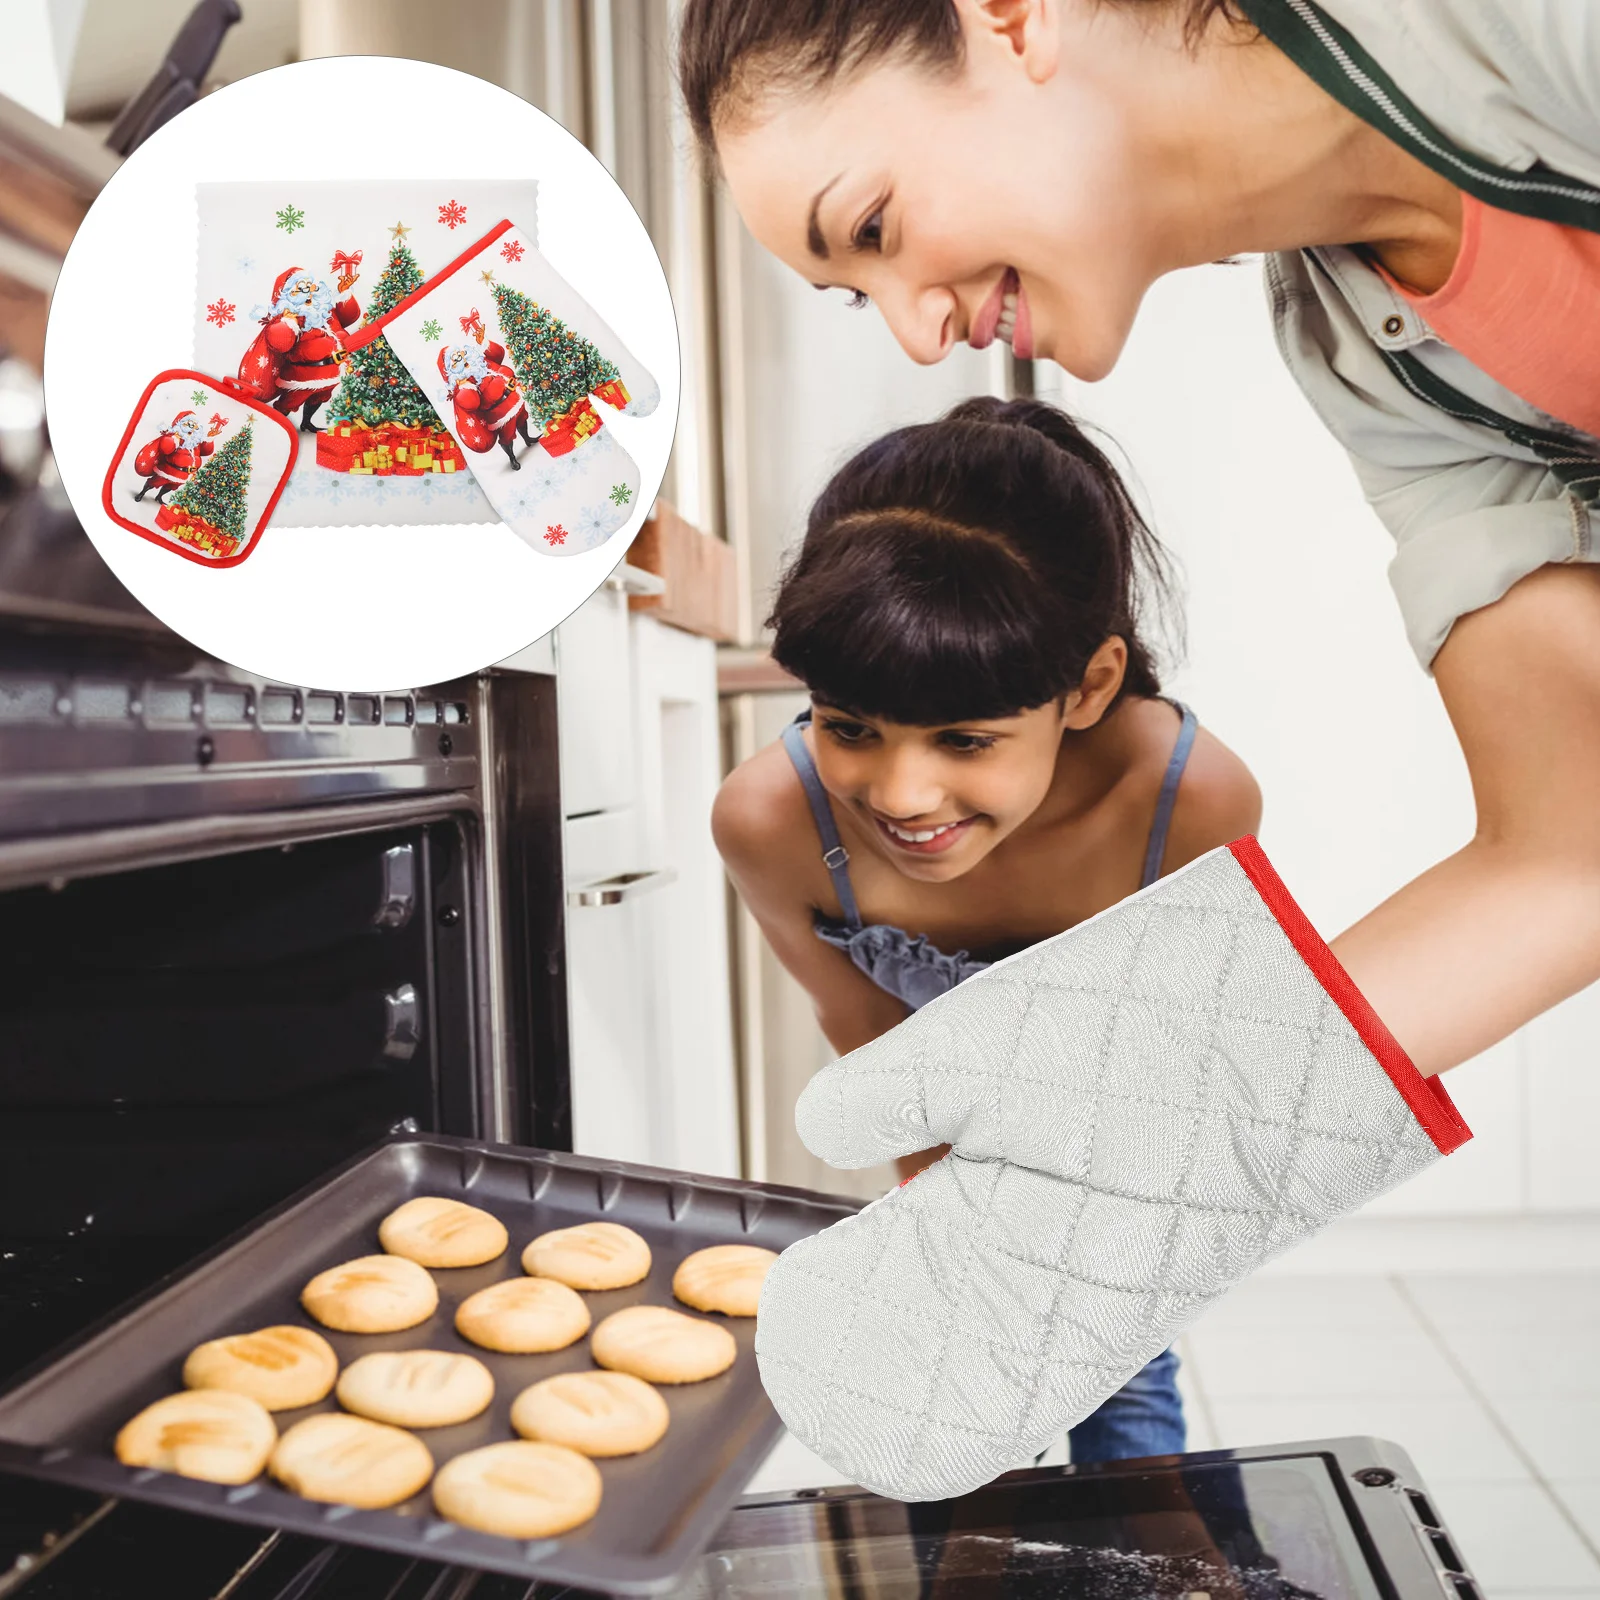 

Christmas Oven Pot Gloves Mitts Kitchen Holders Towels Baking Mittenscookingholder Hotpads Grilling Dish Mitt Microwave